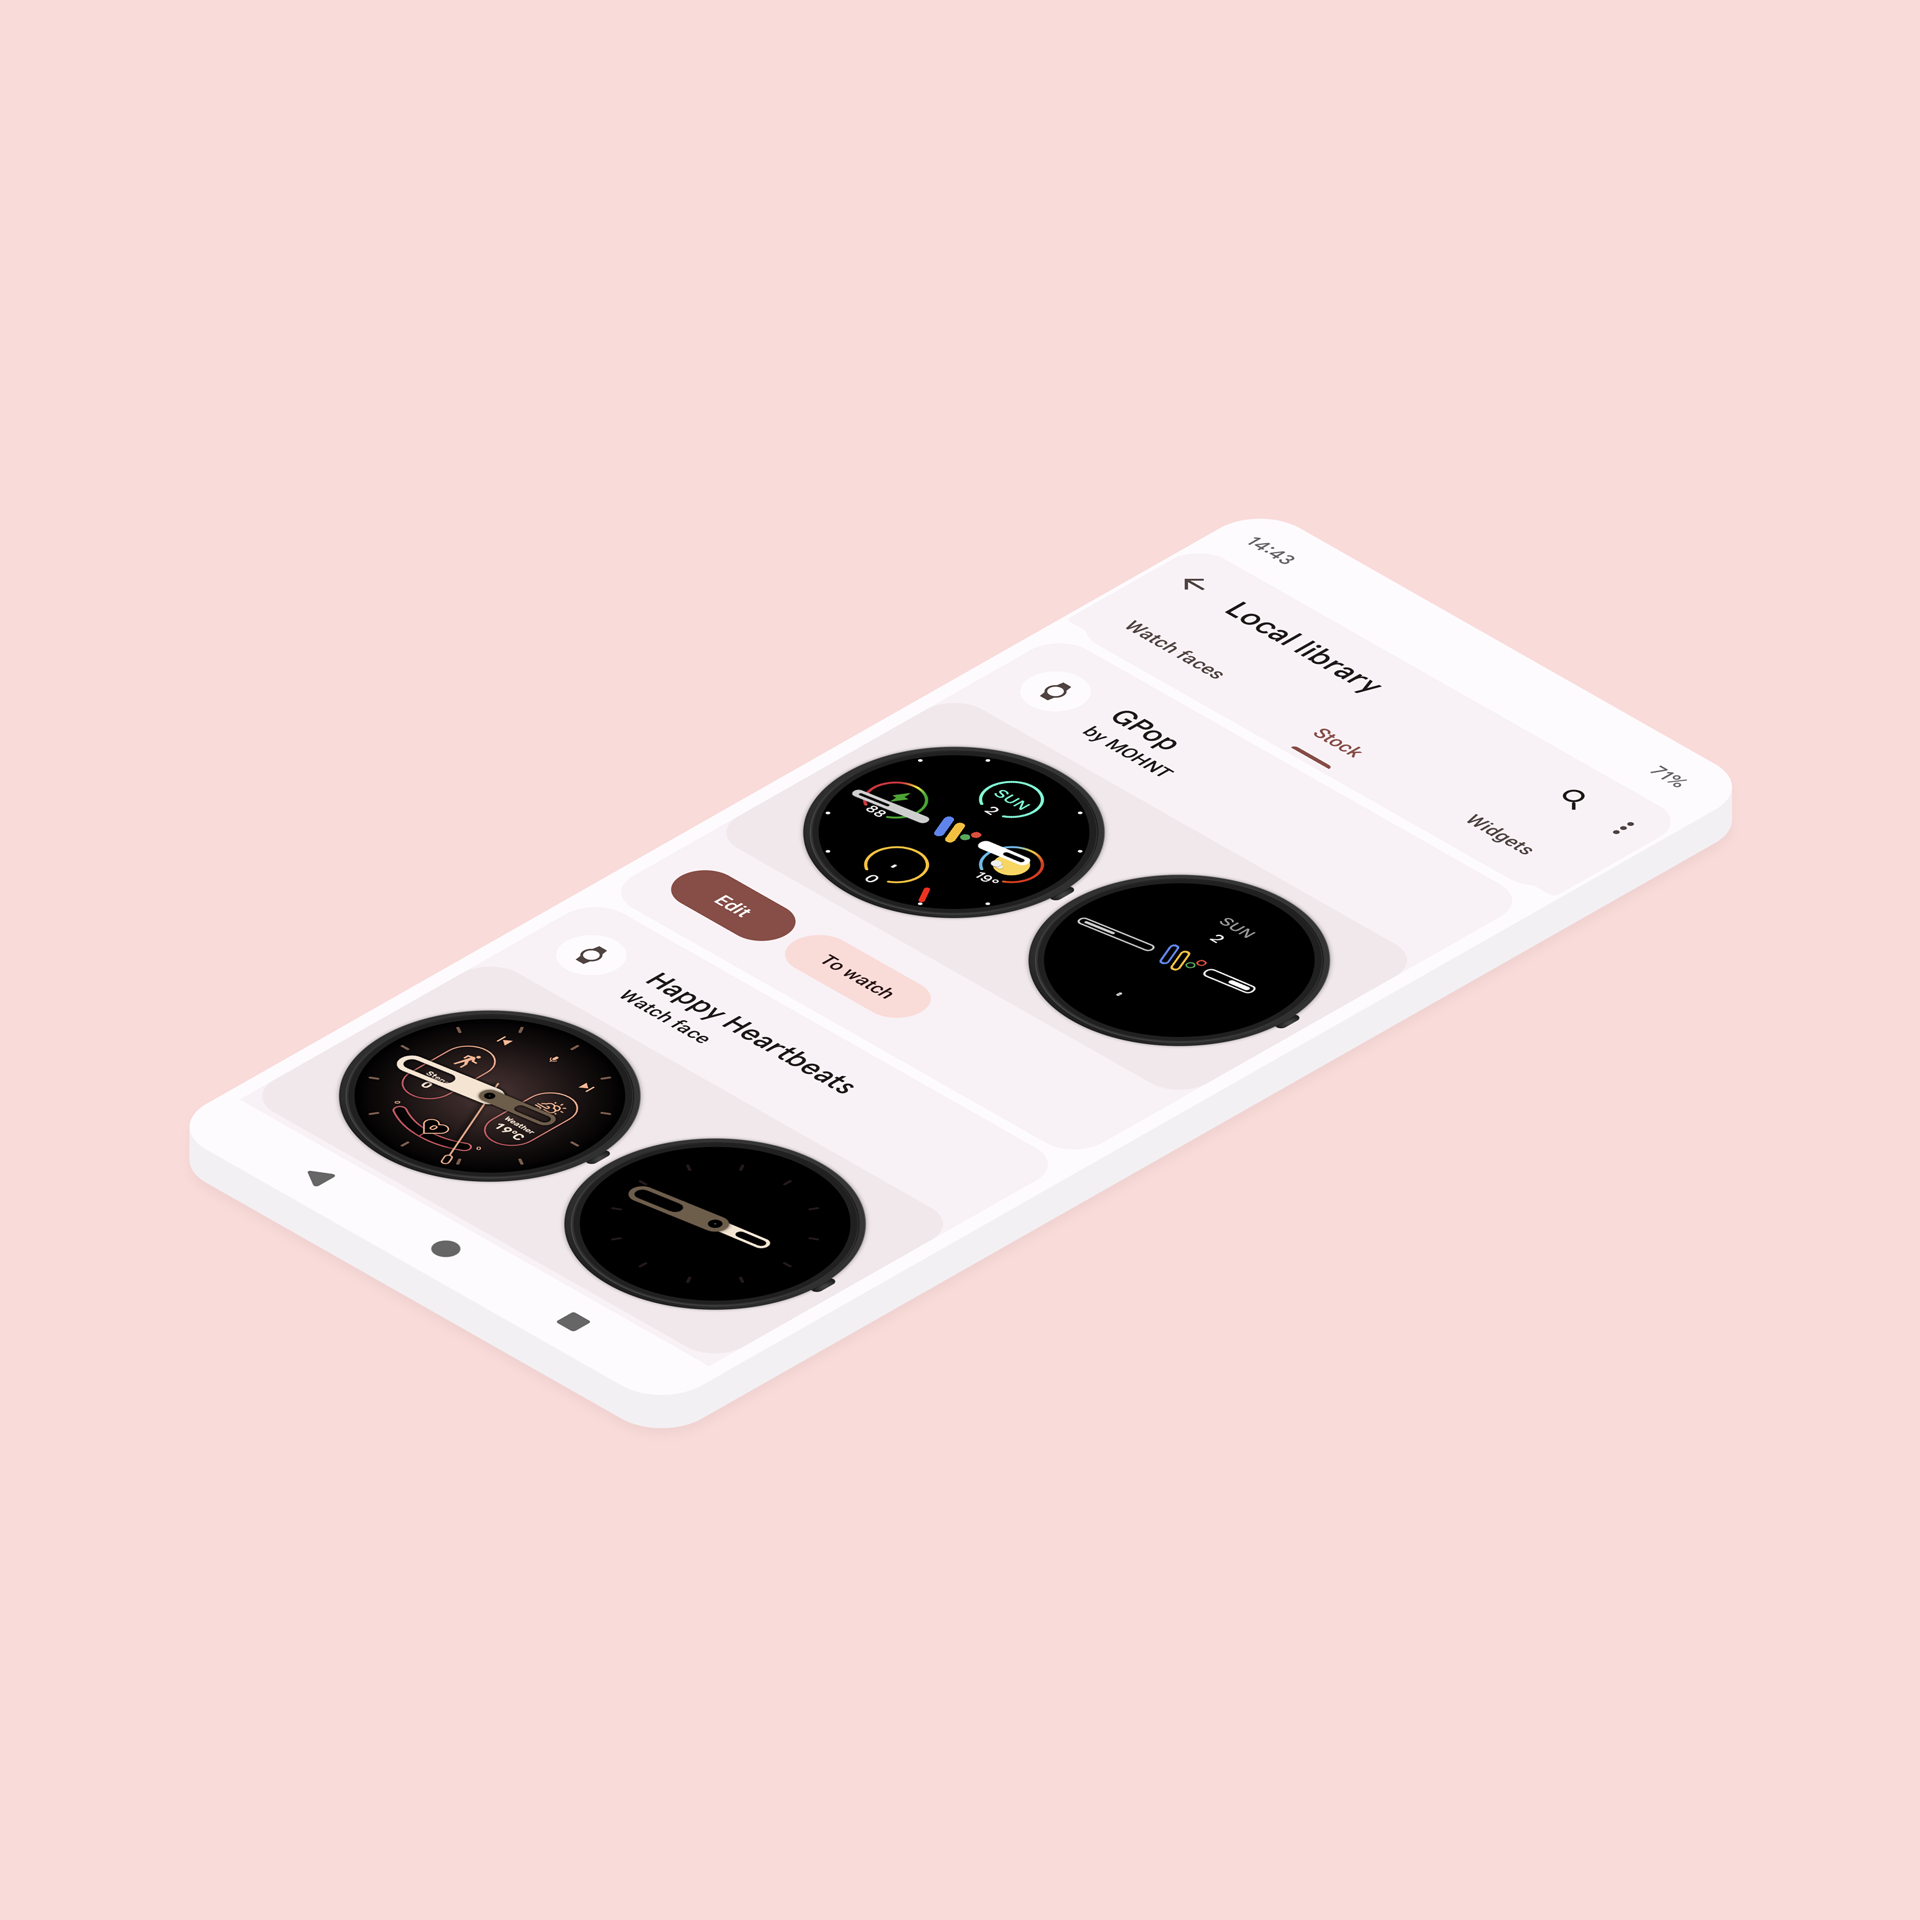 Watch face library